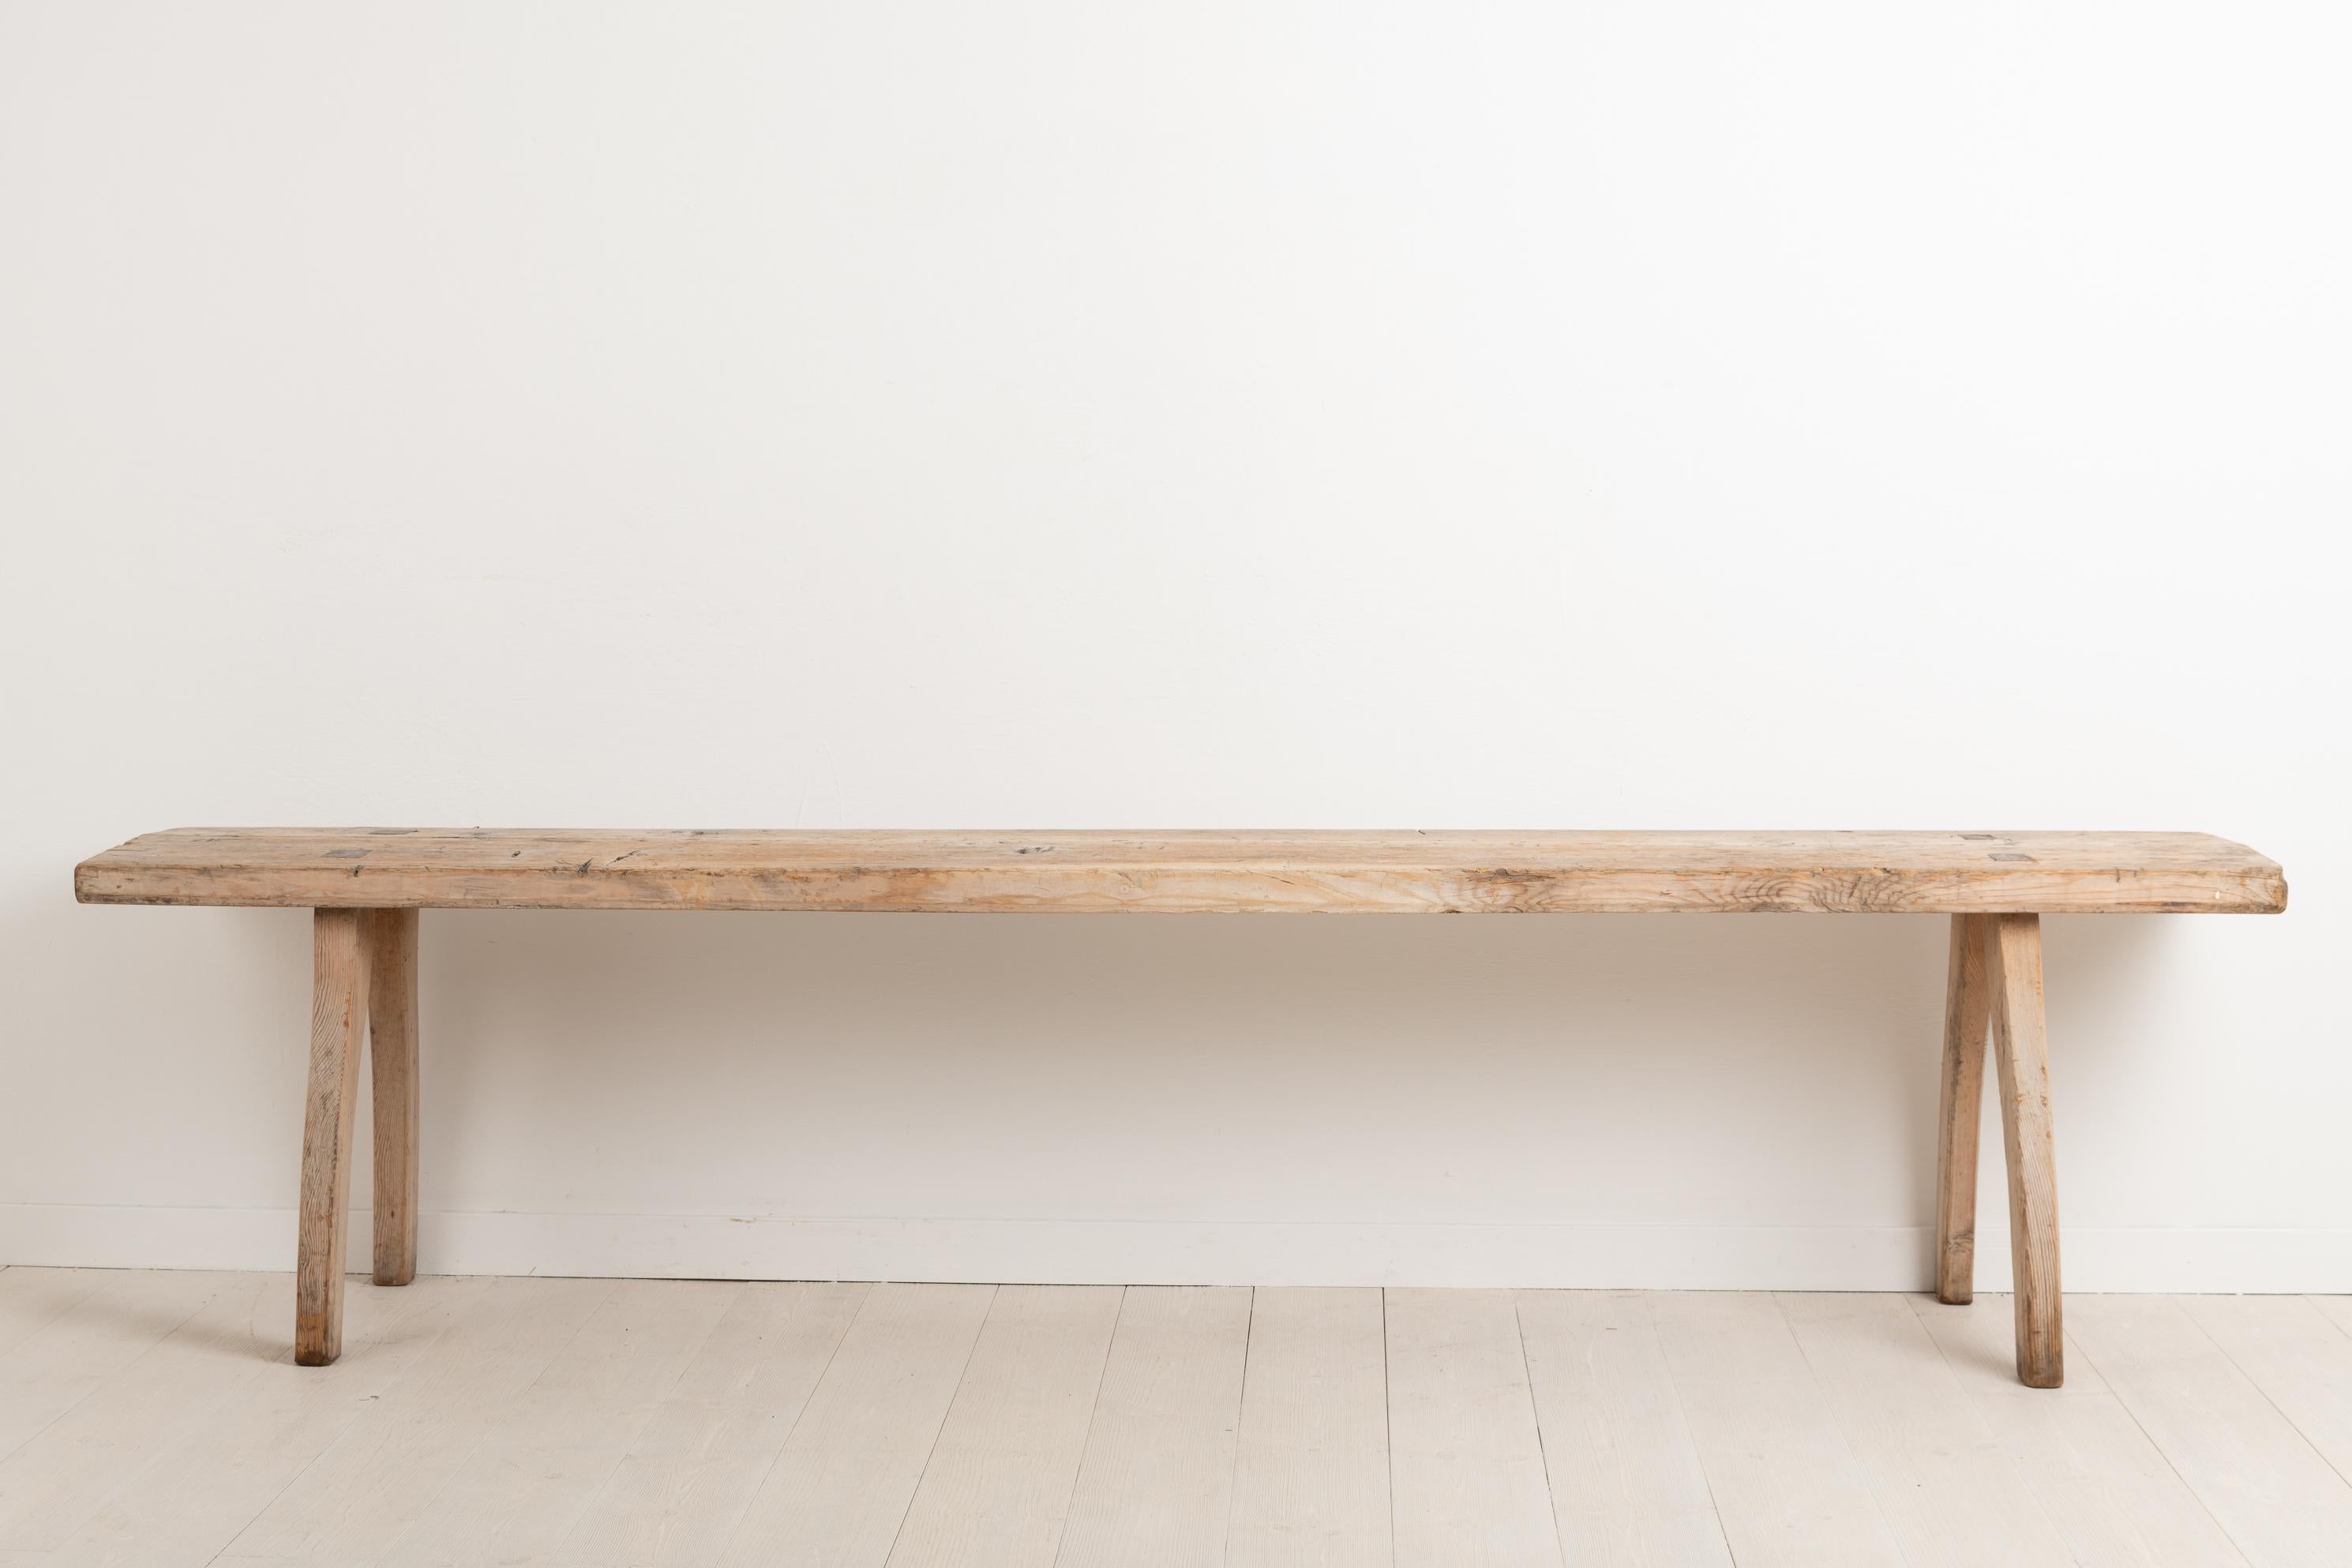 Hand-Crafted Late 18th Century Rustic Bench in Swedish Pine